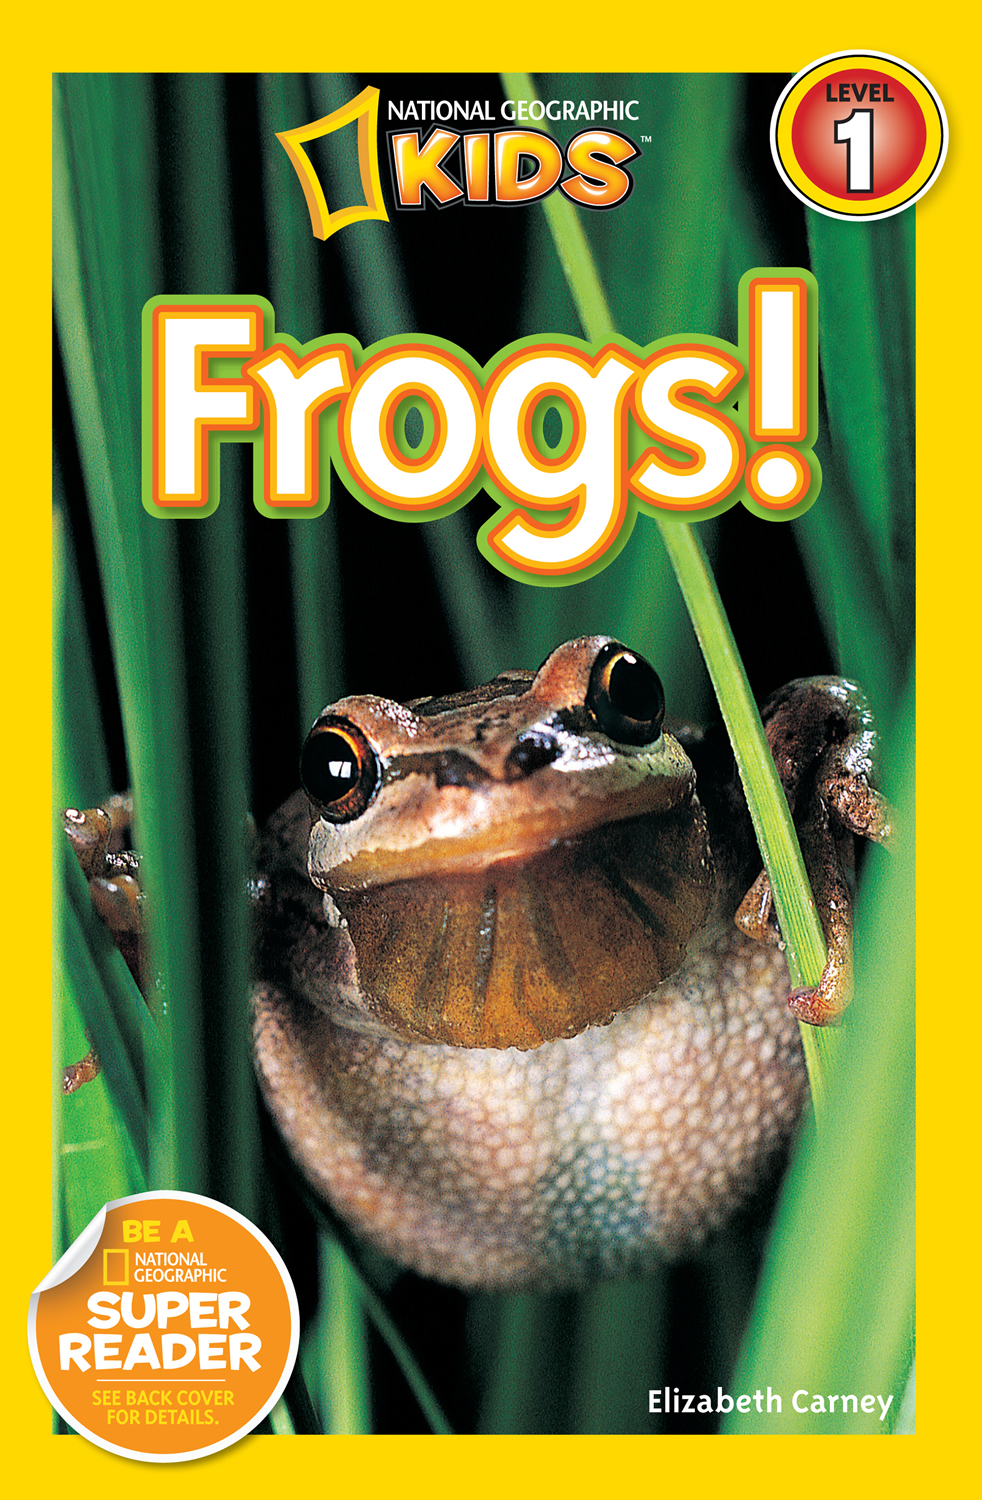 National Geographic Kids: Frogs!